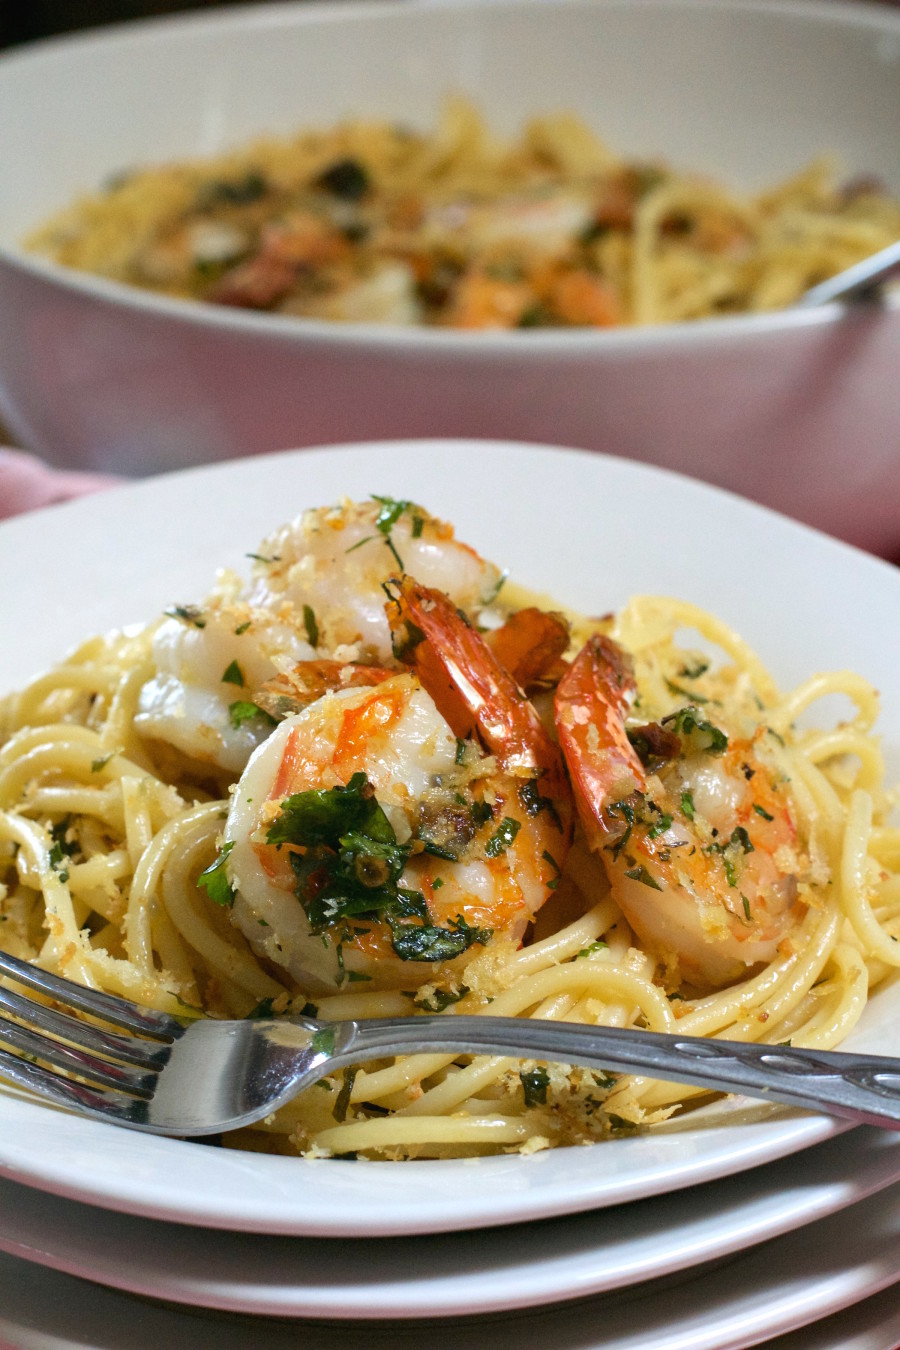 Herbed Shrimp and Pasta with Crispy Crumbs - What the Forks for Dinner?